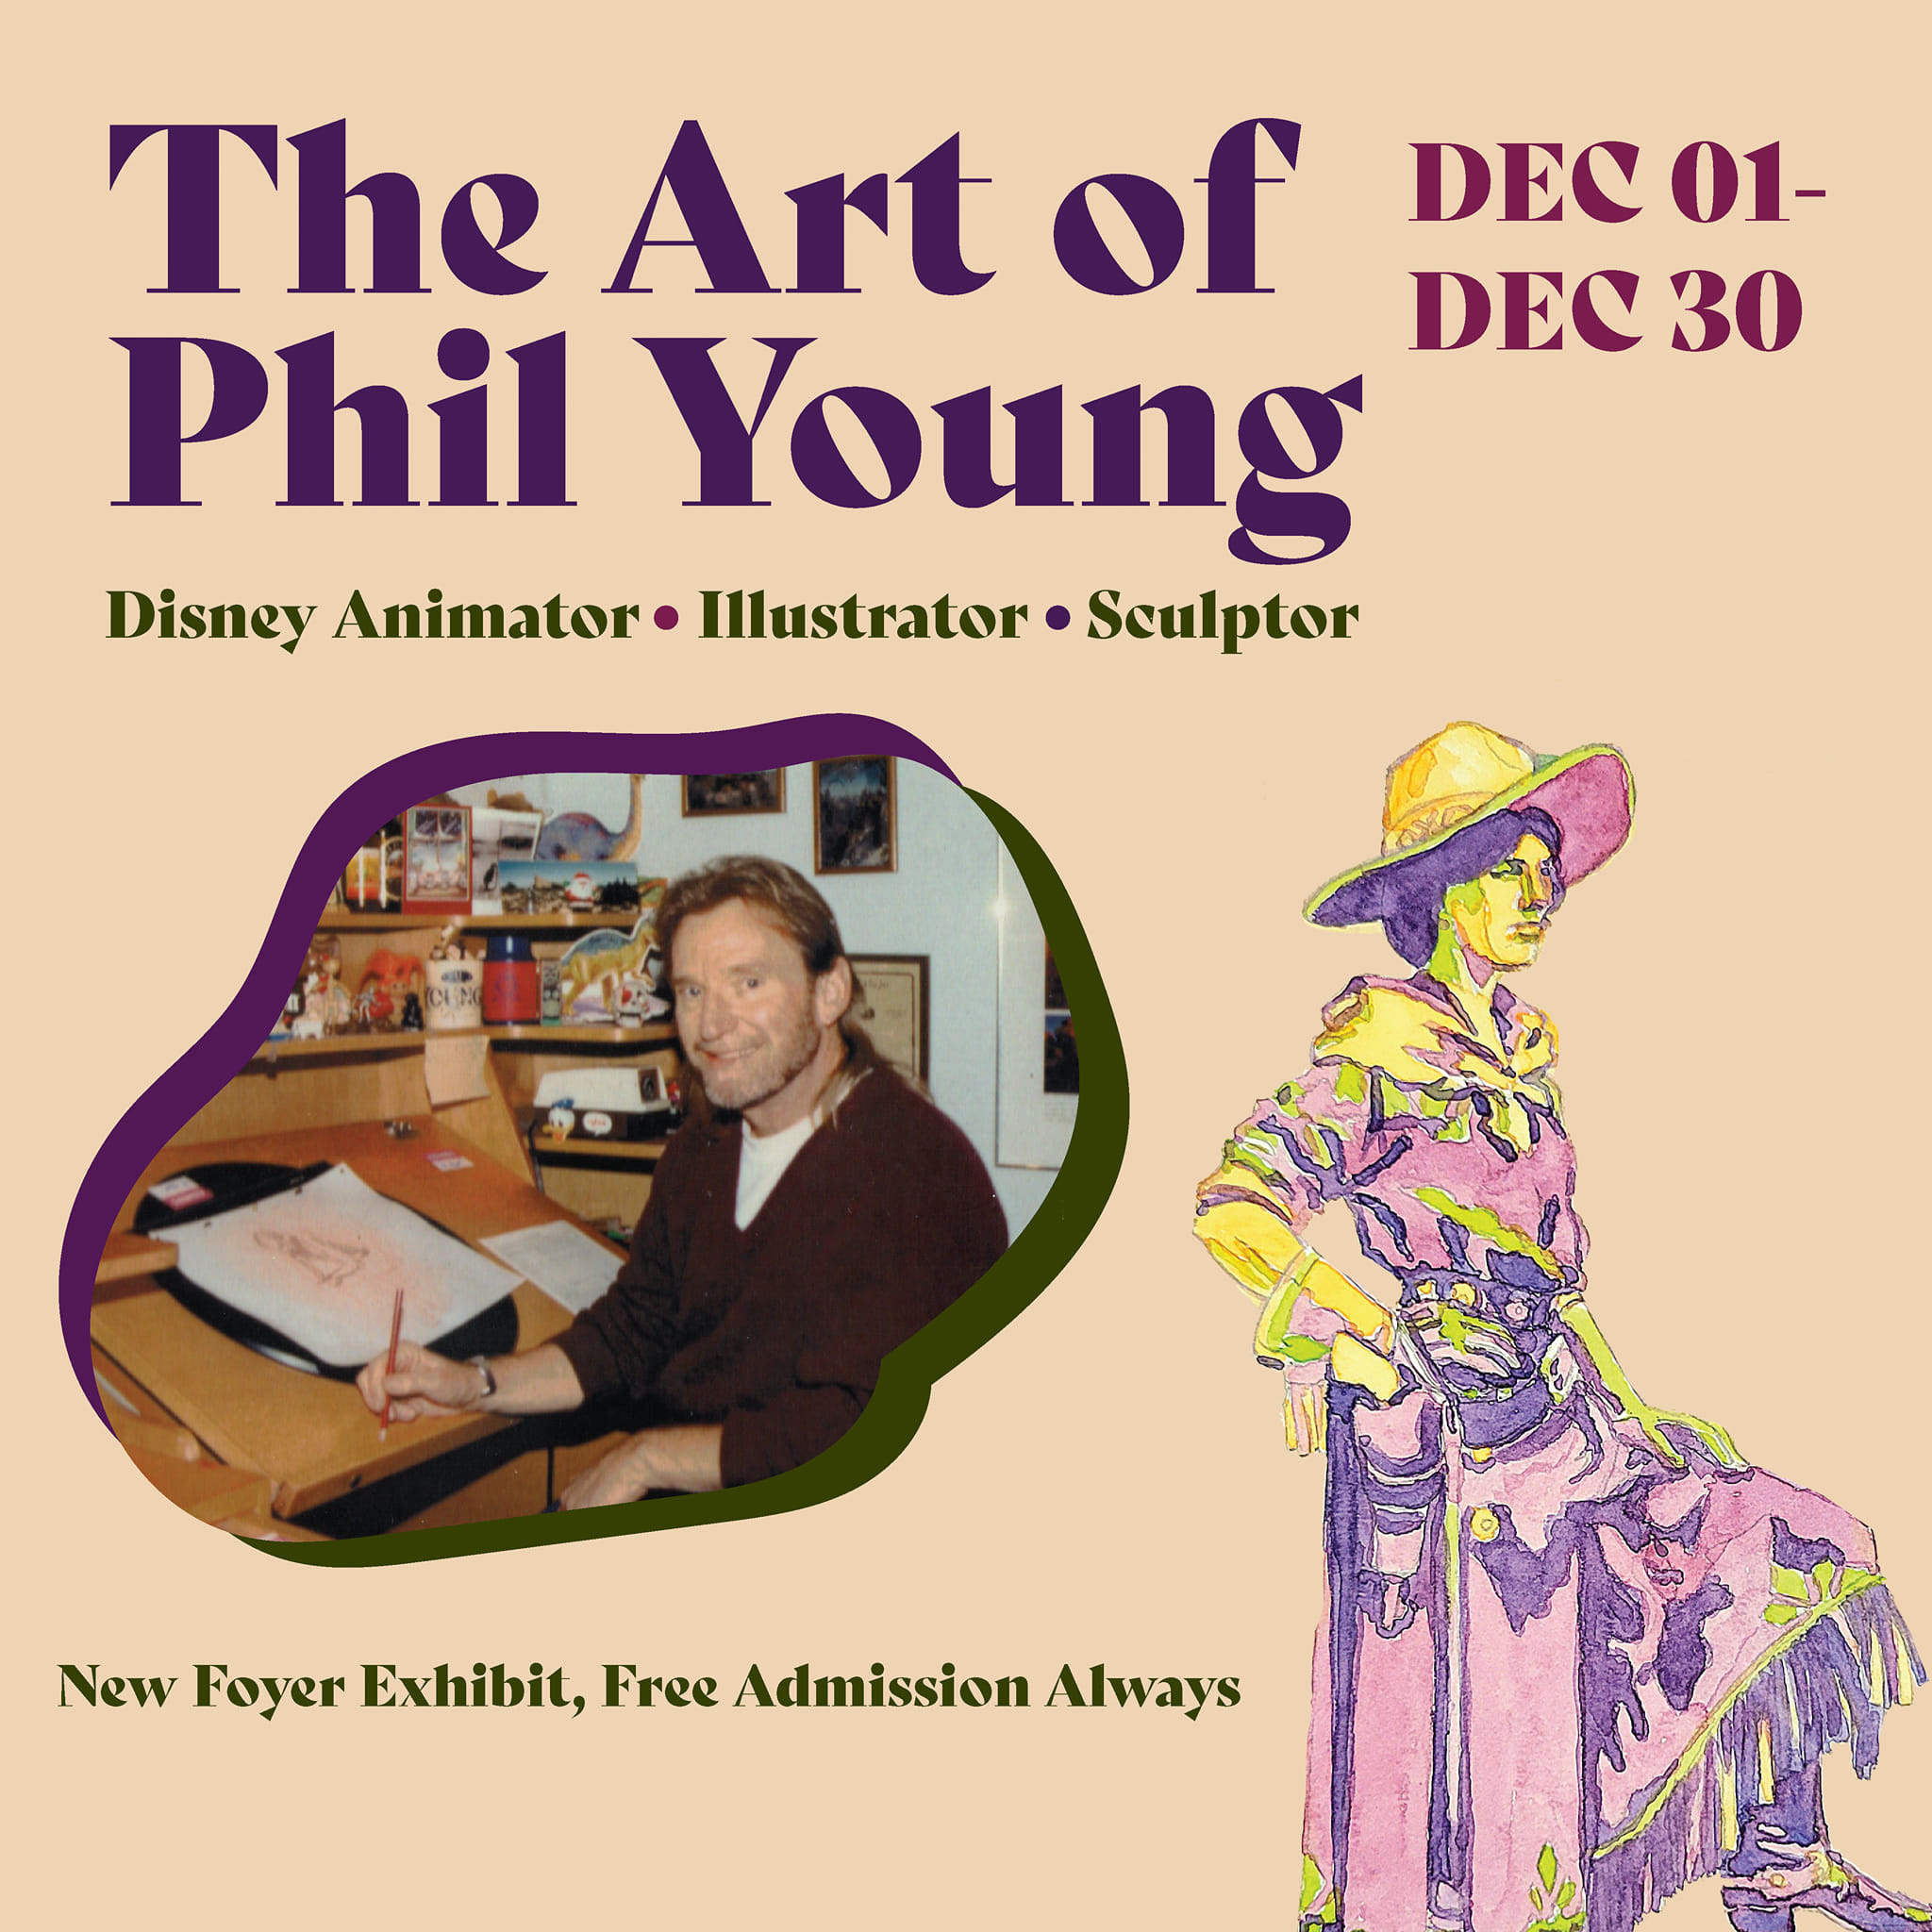 The Art of Phil Young